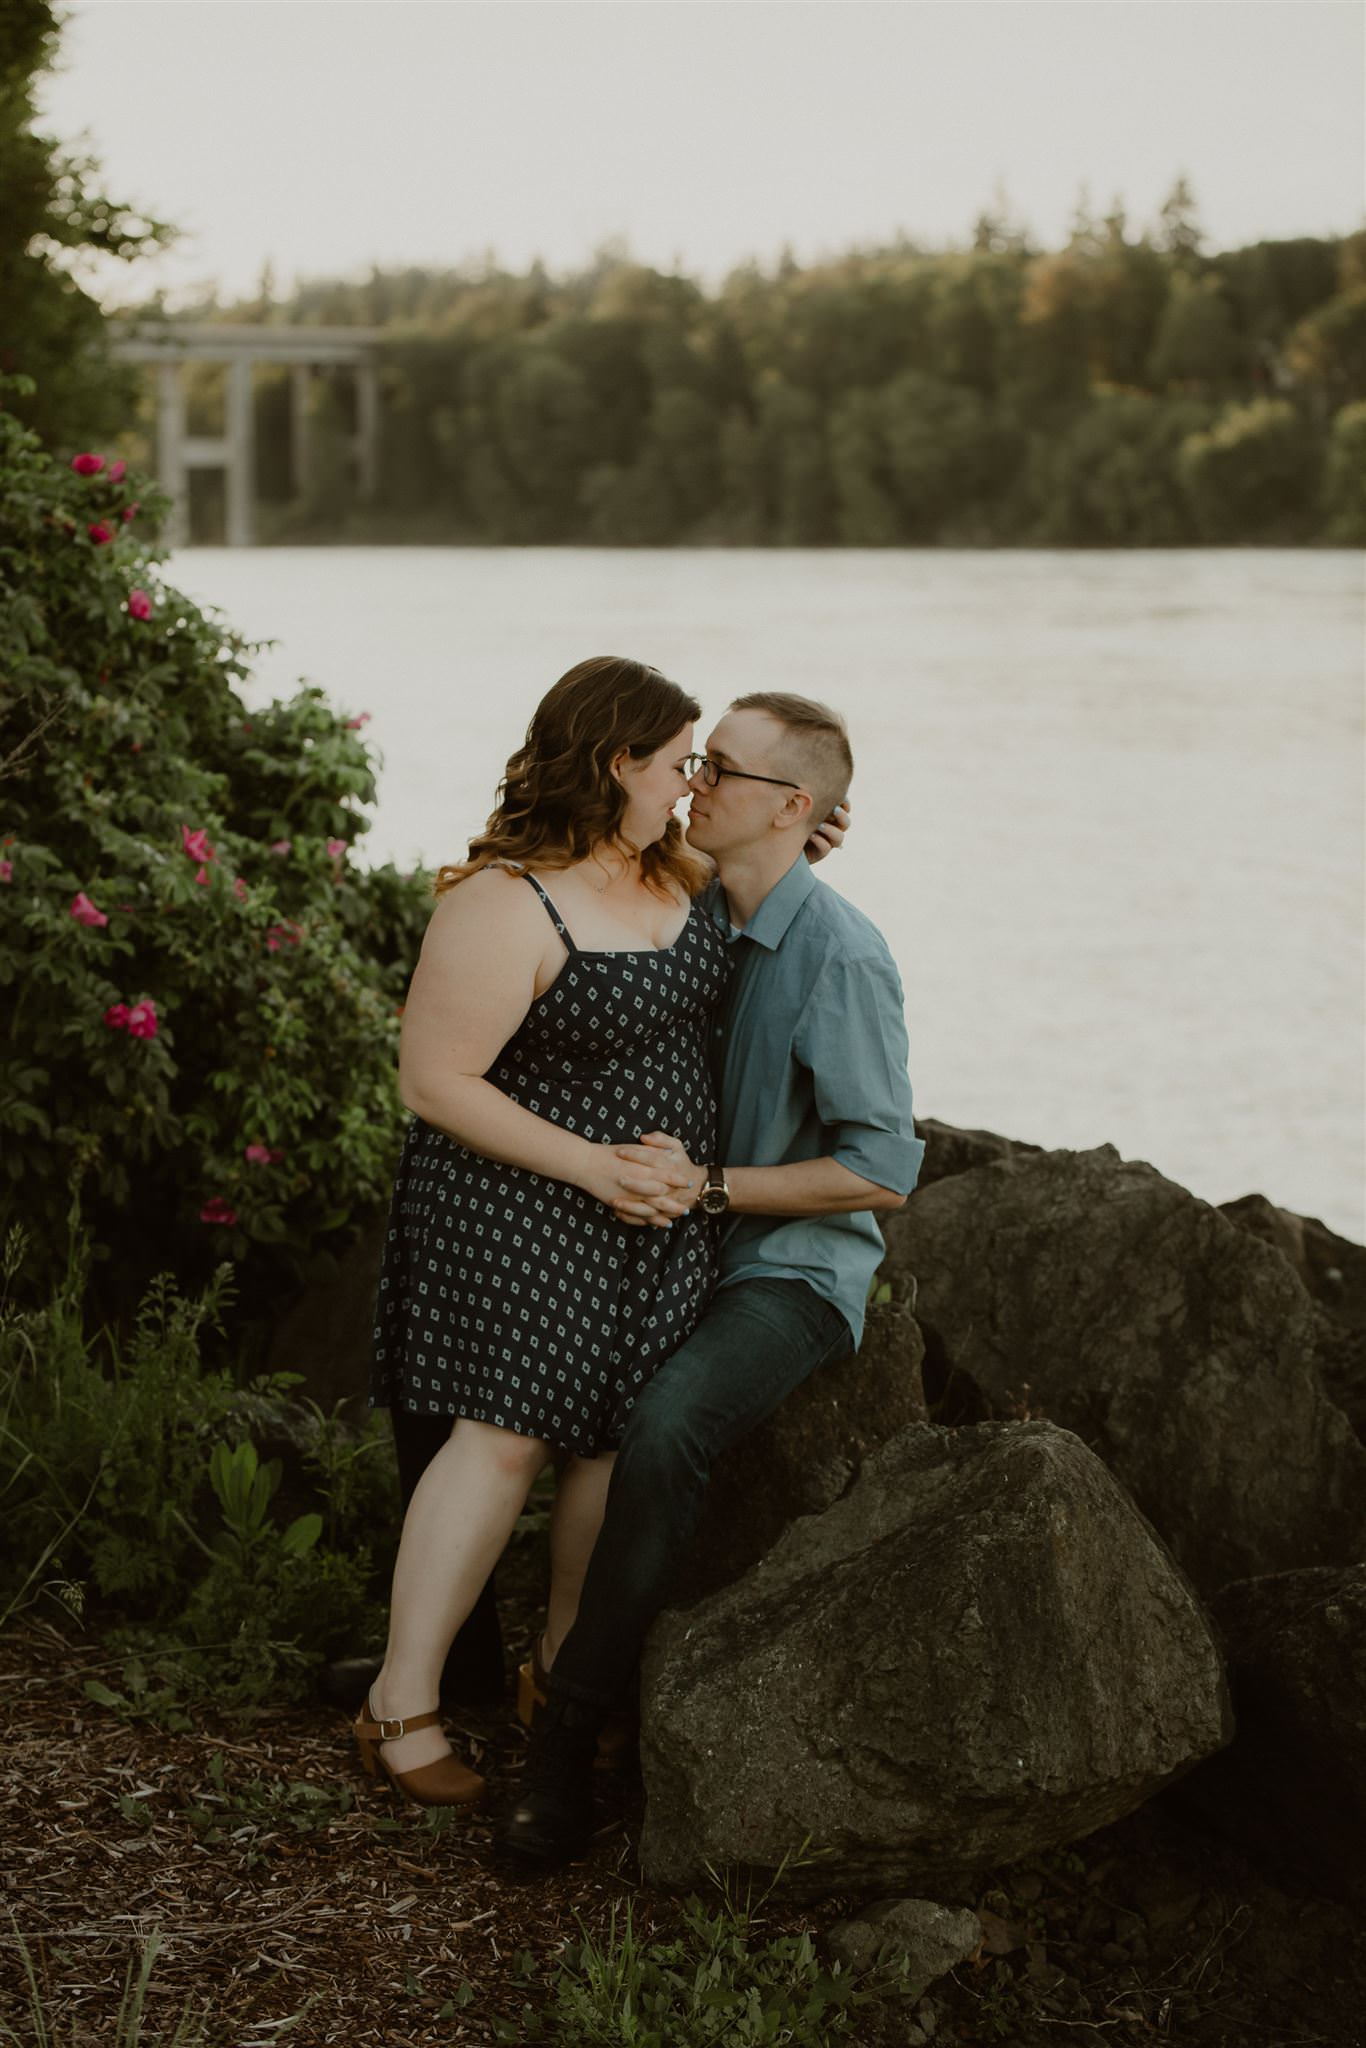 Sunset couples portraits in Kitsap County, WA, including surrounding areas of Silverdale, Poulsbo, Bremerton, and Kingston. 